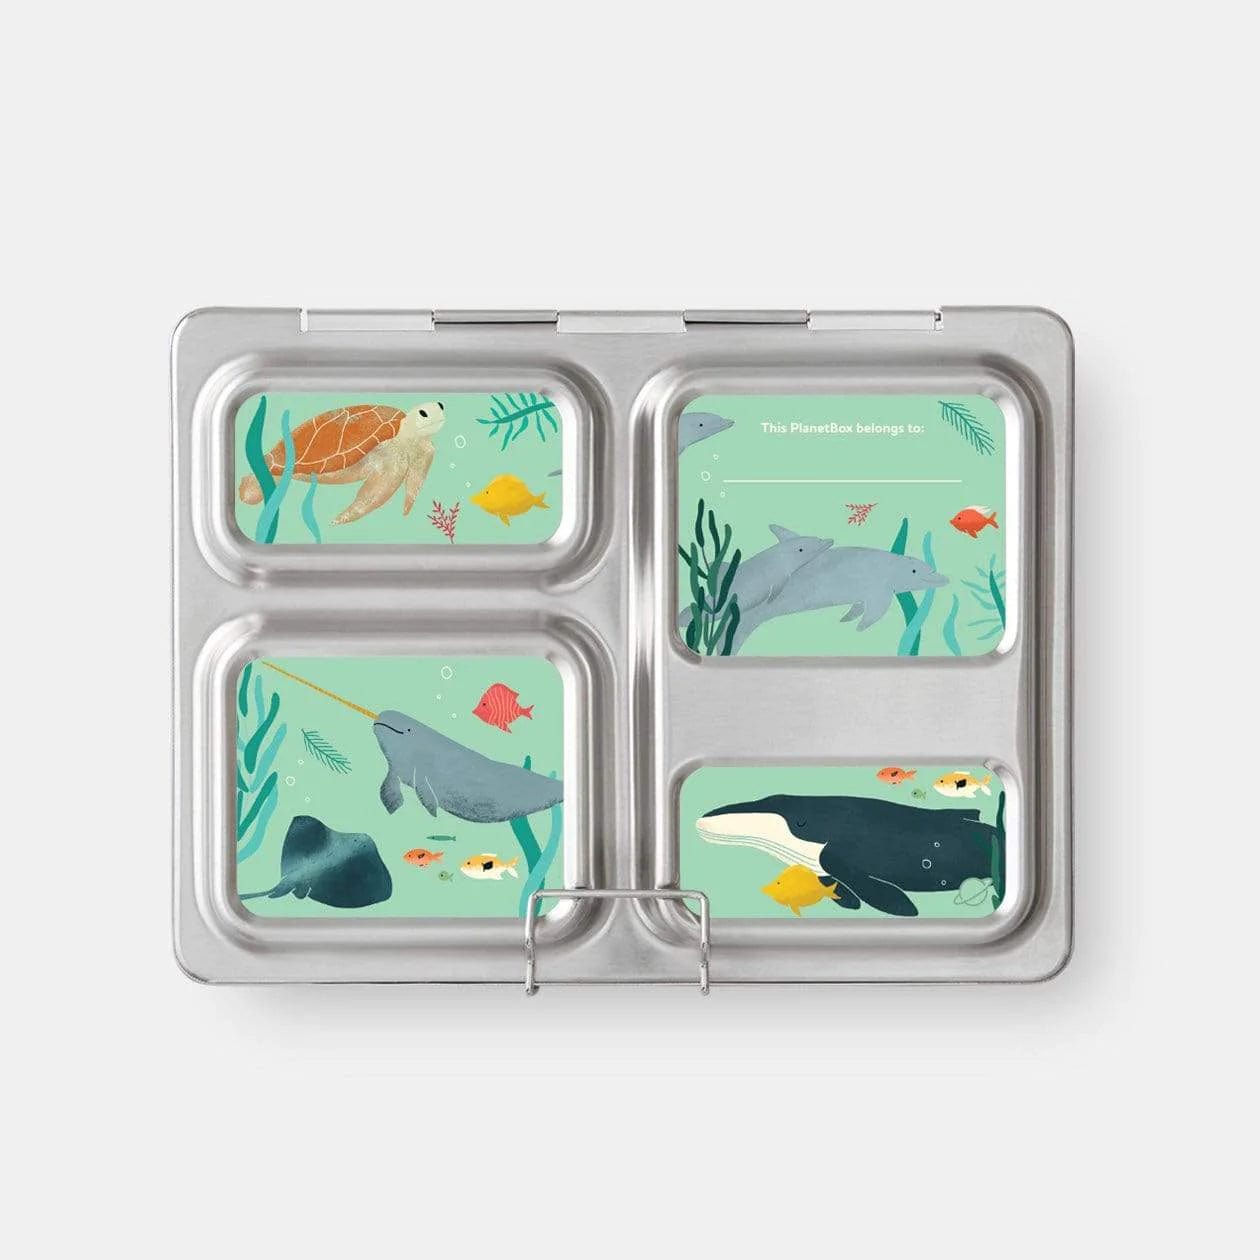 Planetbox LAUNCH Lunch Box Kits (Box, Carry Bag, Containers, Magnets) Unicorn Magic / Sea Life (New)